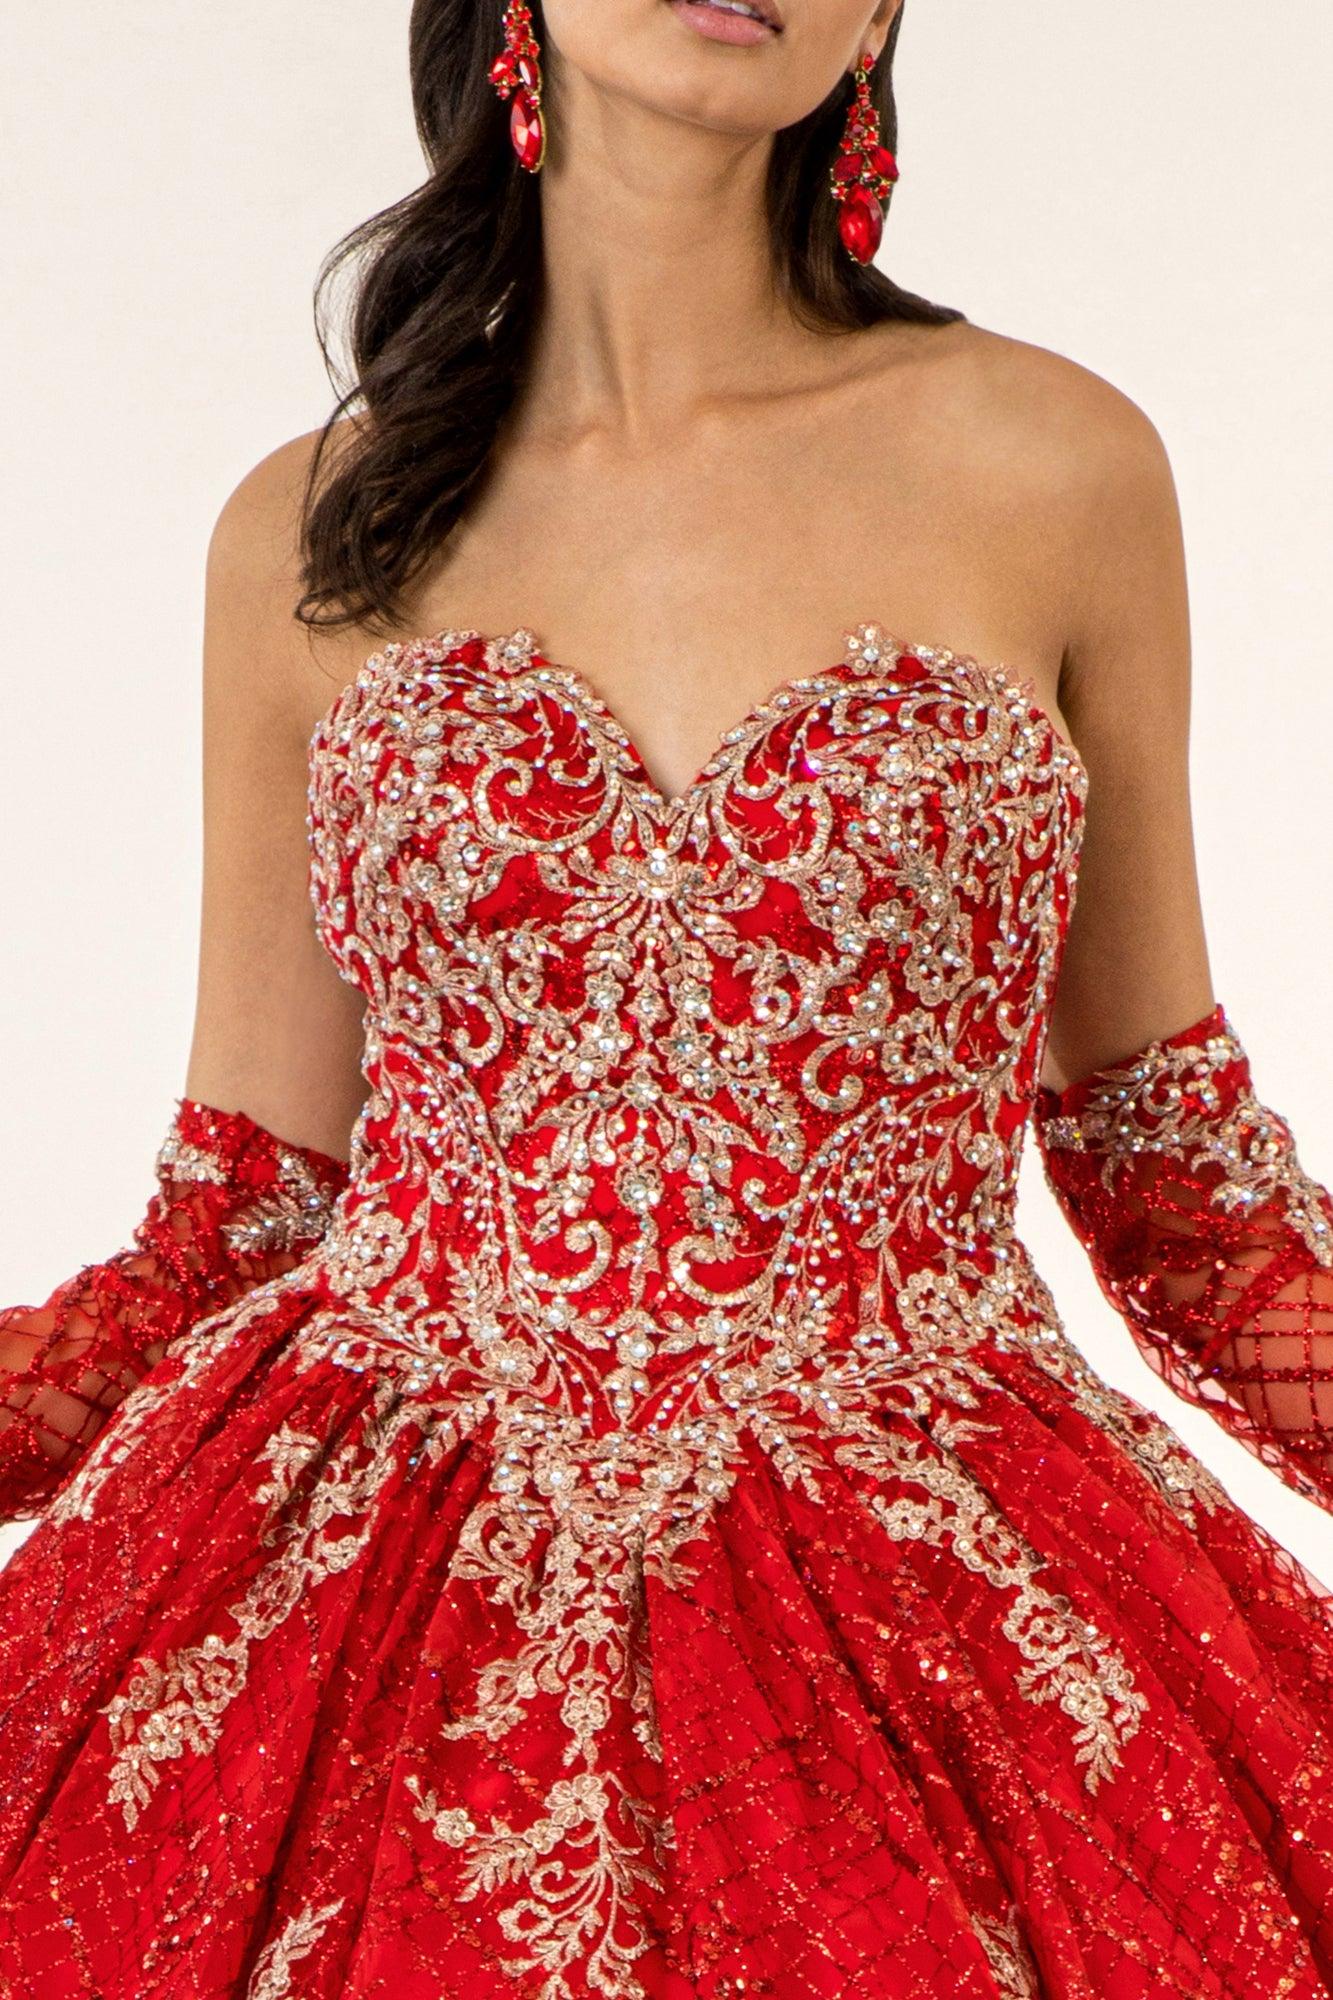 Long Strapless Quinceanera Glitter Mesh Ball Gown - The Dress Outlet